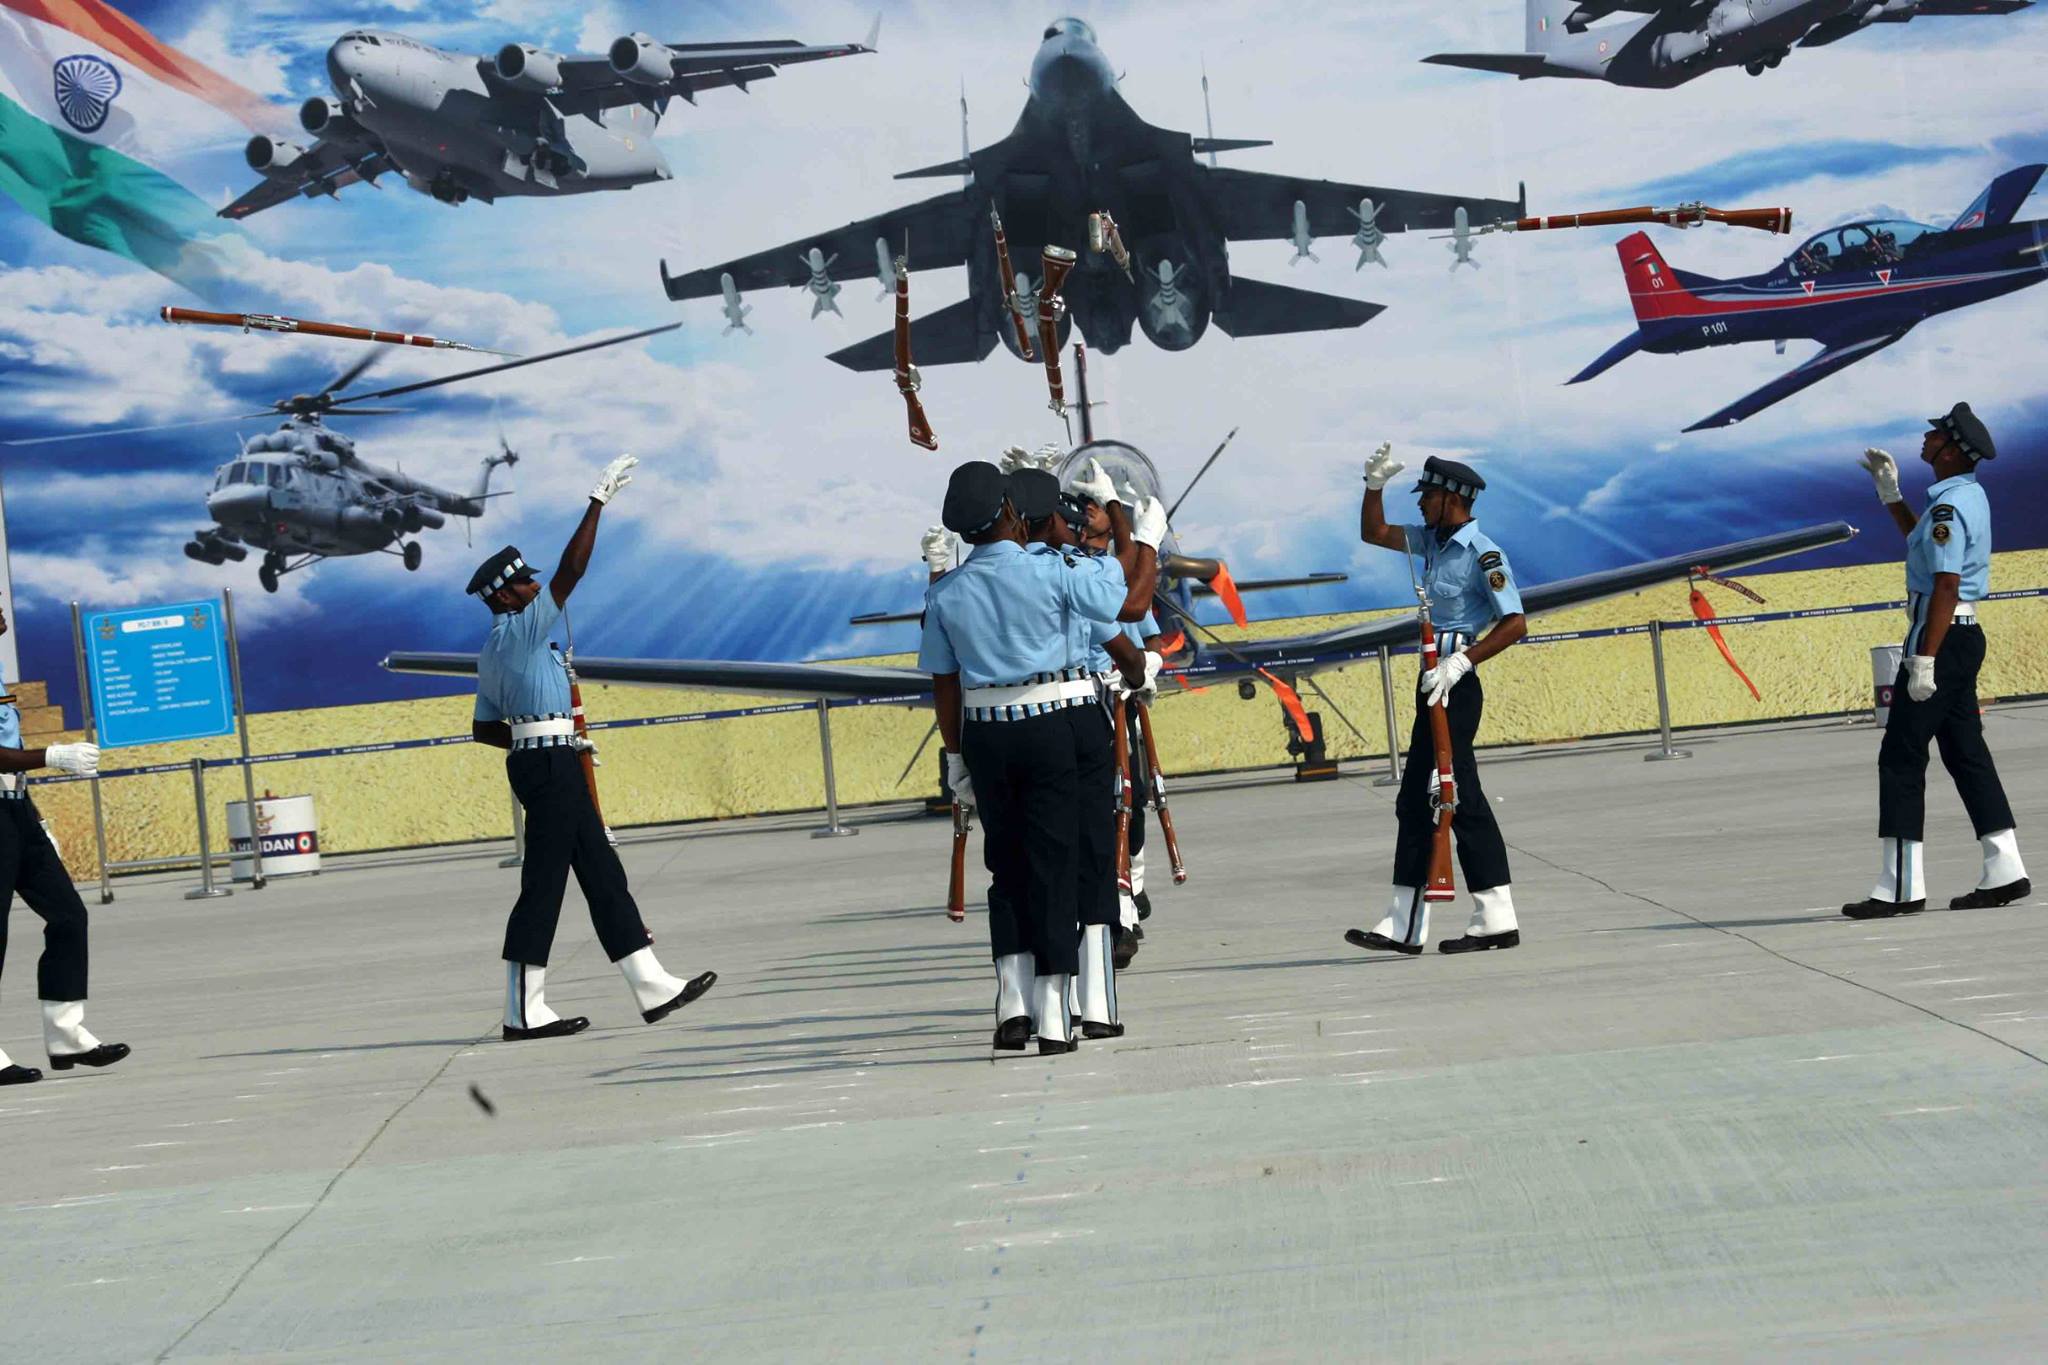 Picture From The 83rd Indian Air Force Day Celebrations That'll